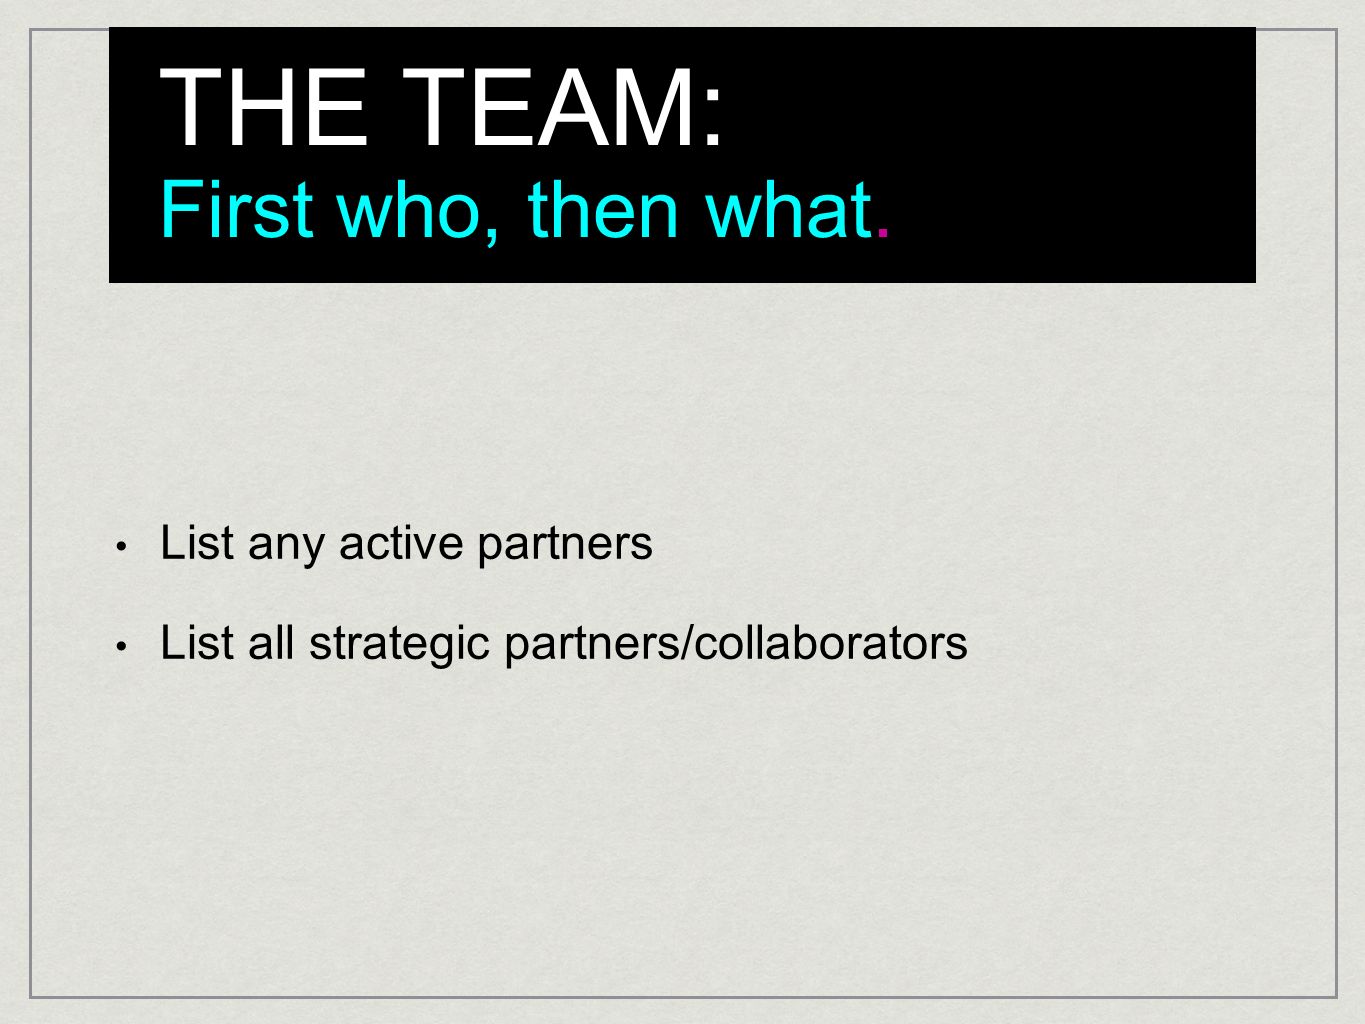 THE TEAM: First who, then what. List any active partners List all strategic partners/collaborators